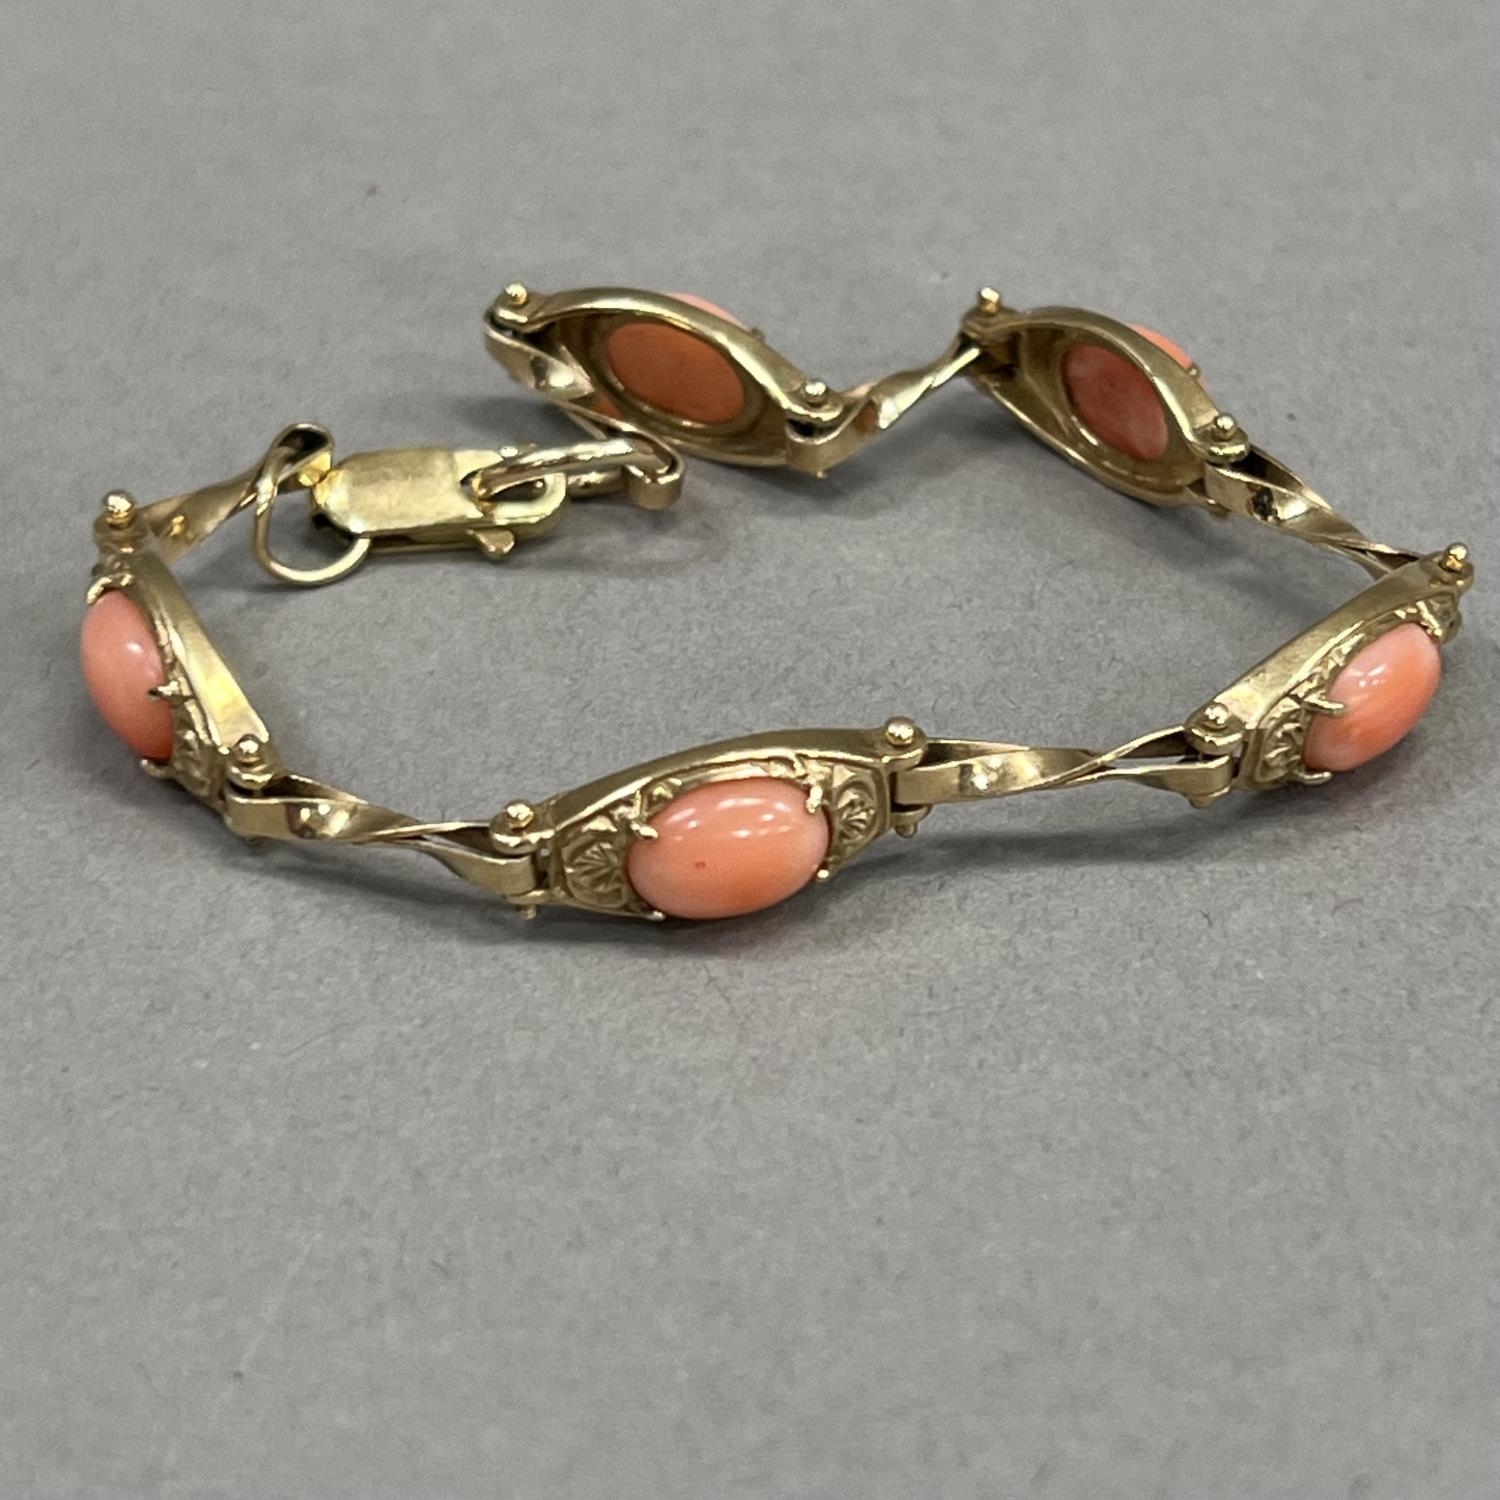 A coral bracelet in 9ct gold, each foliate patterned tonneau link claw set with an oval cabochon - Image 2 of 2